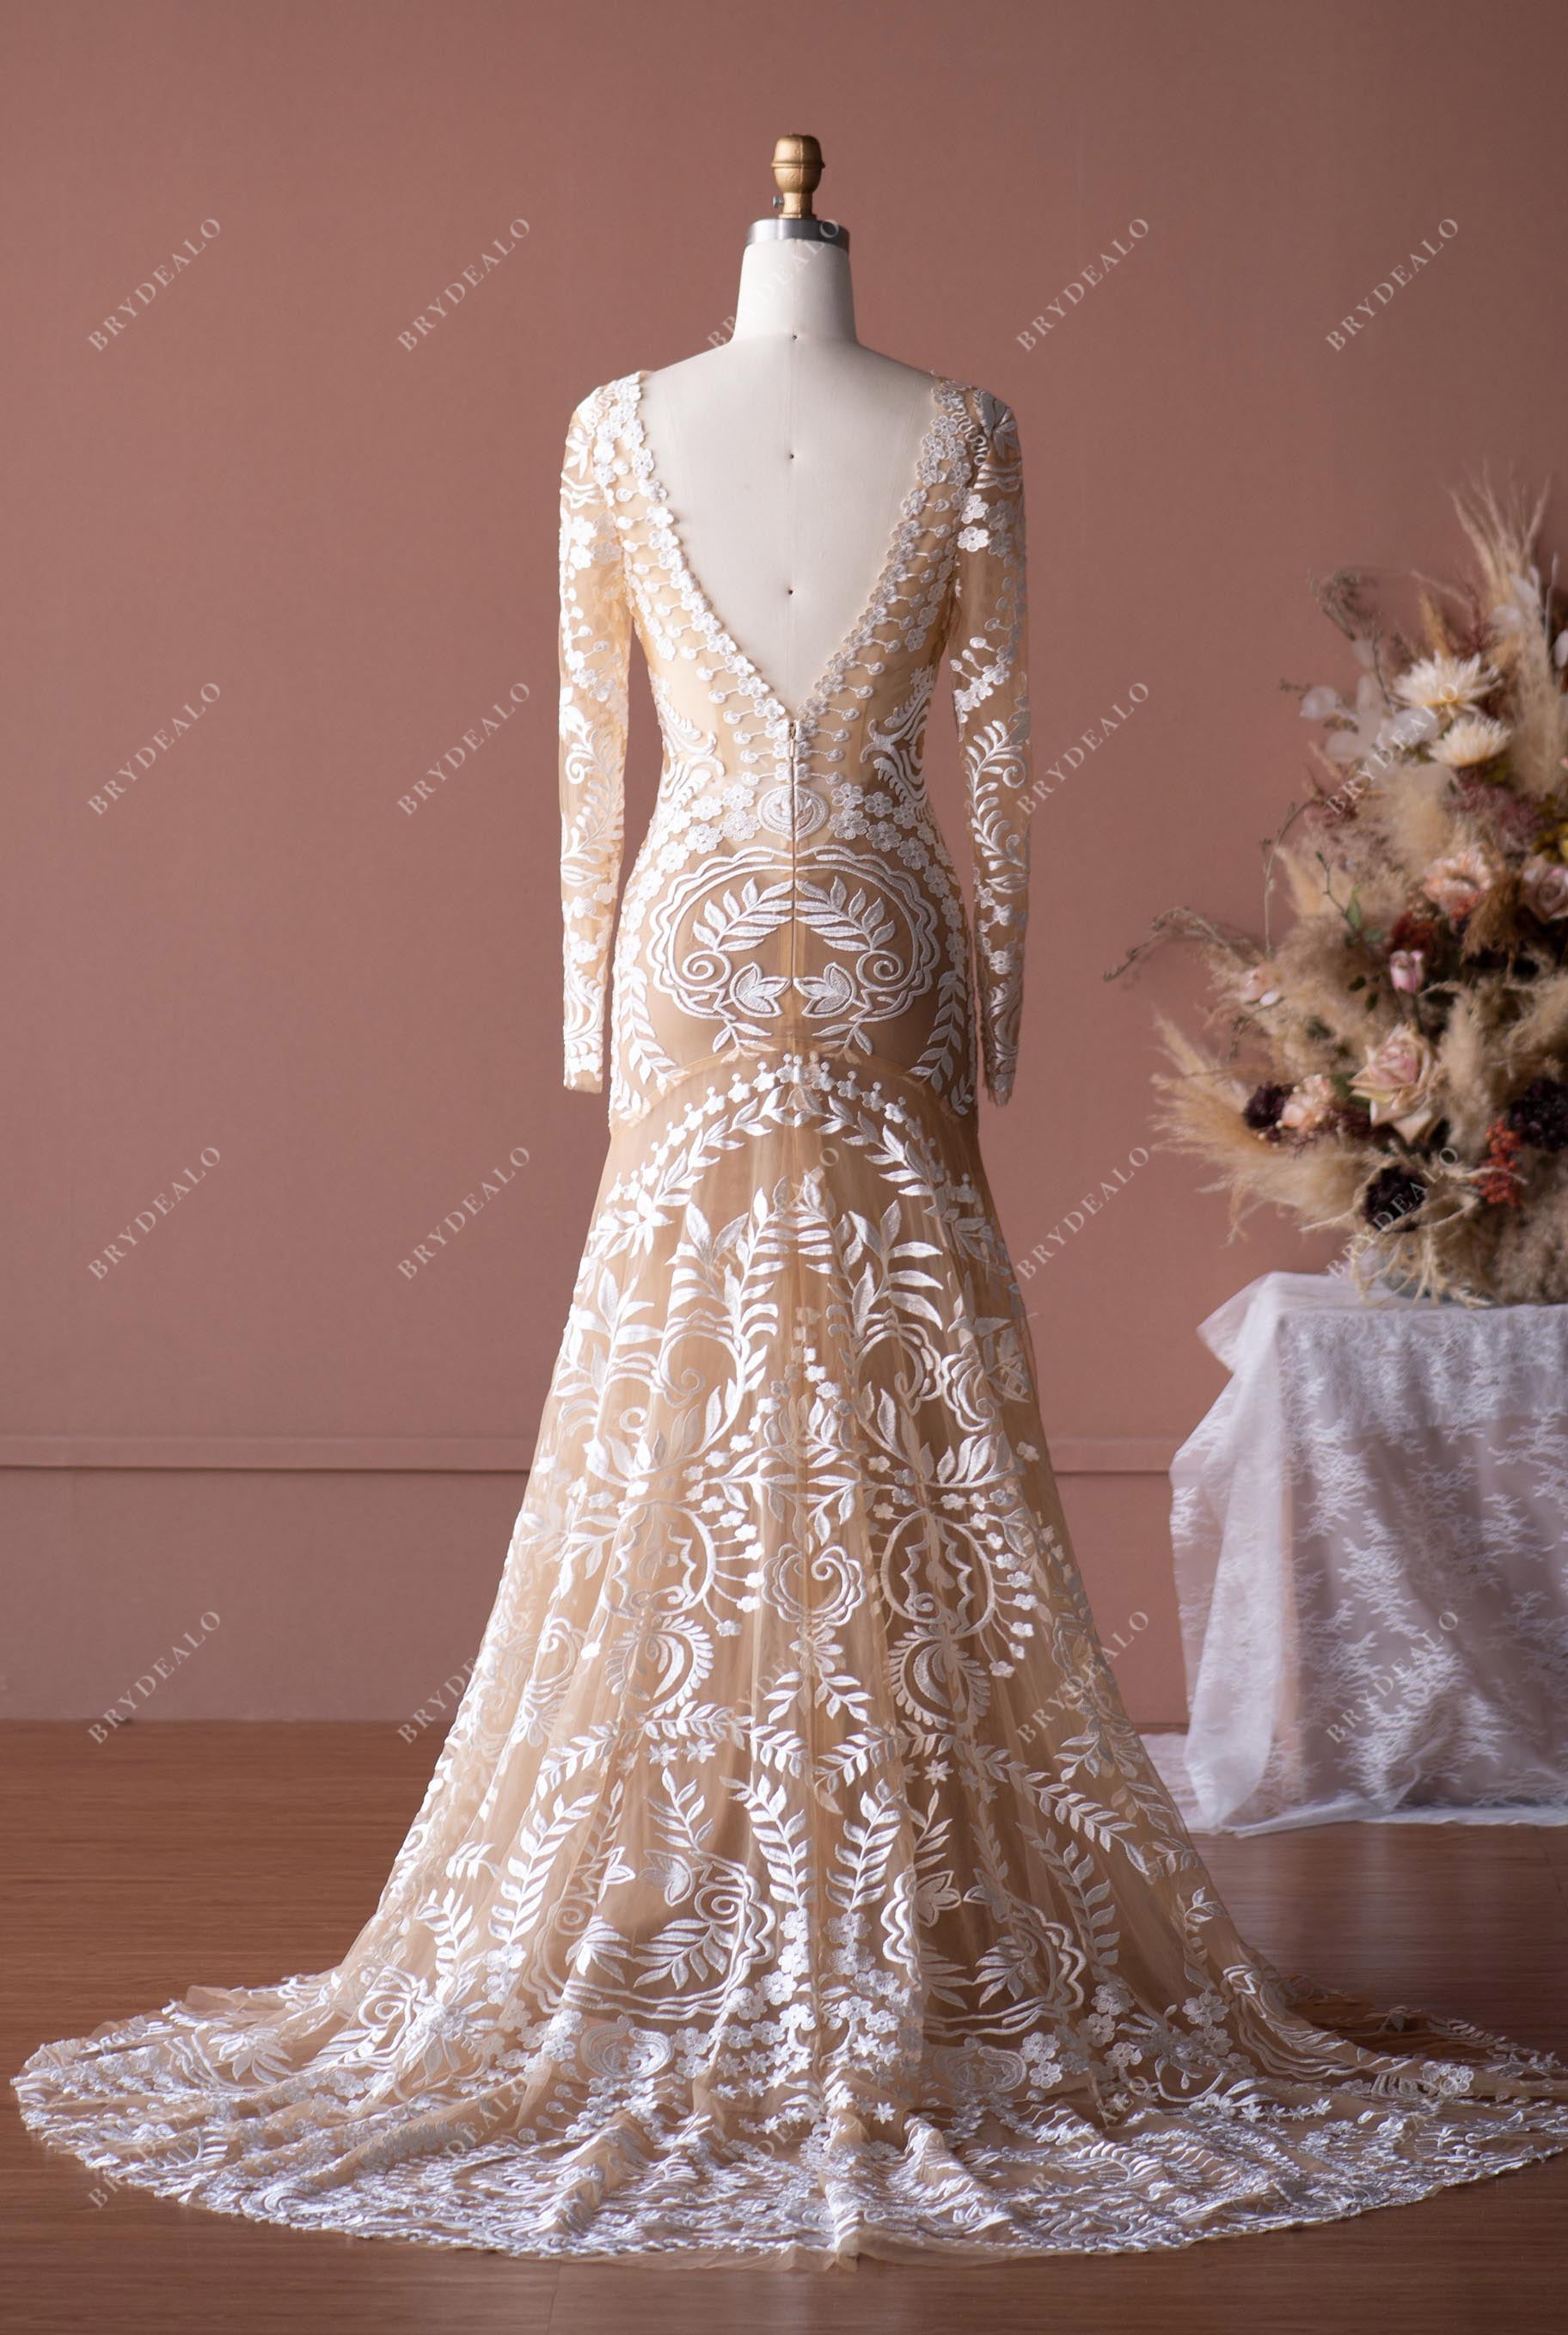 Sleeved Lace Open V-back Fit and Flare Long Train Sample Wedding Dress with Slip